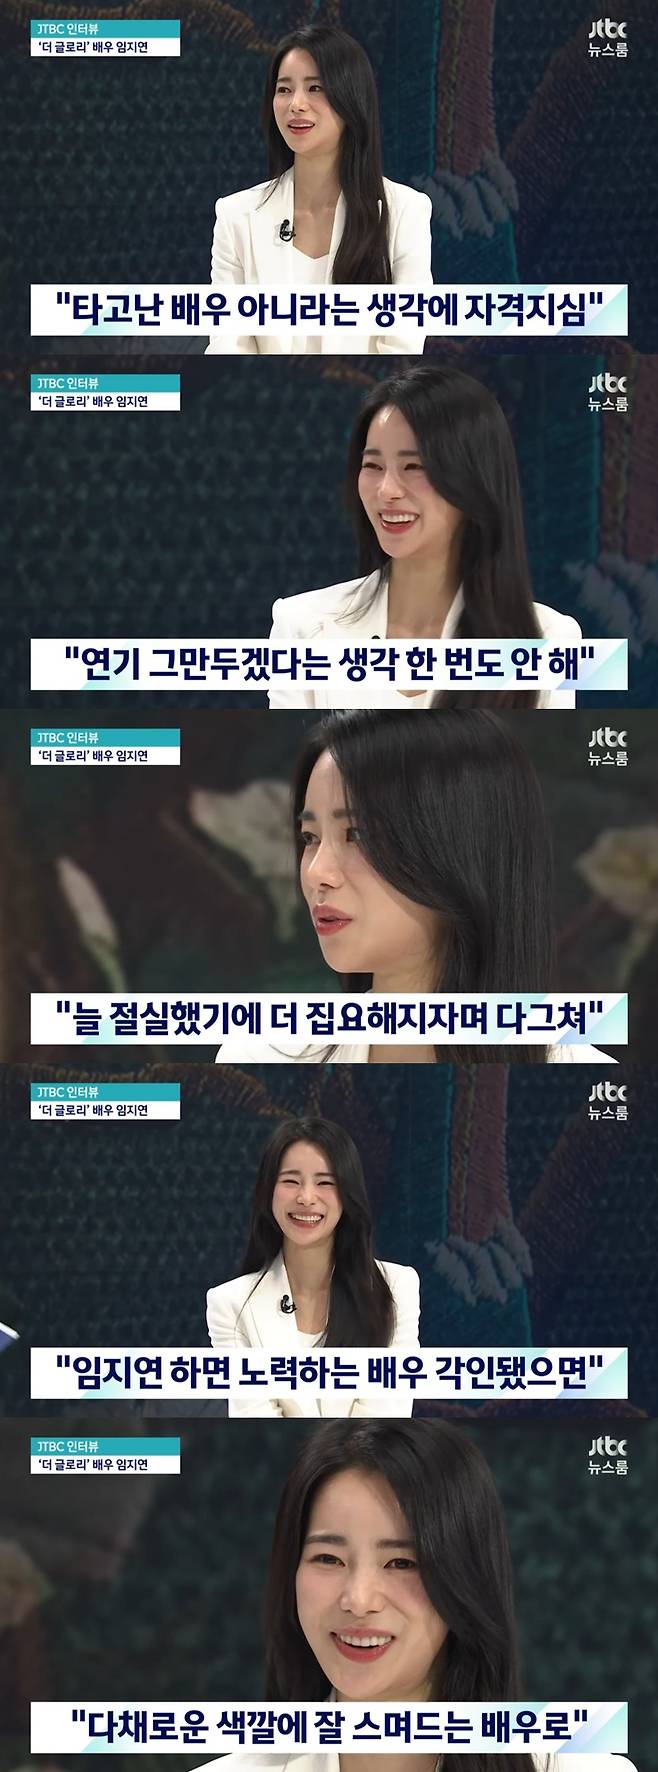 Actor Lim Ji-yeon wept as he looked back on his life as an actor.On the 26th, JTBC The Newsroom featured Lim Ji-yeon, who played the role of Park Yeongene in the Netflix original series The Gloria.Lim Ji-yeon acted Weather Report Girl Park Yeongene, who led the school violence against Moon Dong-eun (Song Hye-kyo) and raised her daughter.Lim Ji-yeon said, I have been desperate for a long time. I have to work harder, I have to be persistent.I have to study and think about it, he said.I didnt want to regret what I could do because I didnt have enough effort. I couldnt have lacked effort, he said.Also, when the anchor told me that my parents would have been happy and different, My parents said that the most memorable thing I said was that I never said I wanted to quit Acting.He said, Even though I cried like that every day and came home, he said, Thats right. Ji-yeon never said she wanted to quit, she said with tears in her eyes as she recalled her parents.Lim Ji-yeon added, When I talked about the old days, I cried. It was the same in previous interviews.On the other hand, Lim Ji-yeon said, I am an actor with various colors.I would like you to say that you are an actor who loves from one to ten, and I will be an actor who strives as I have always done in other roles. Photo by JTBC